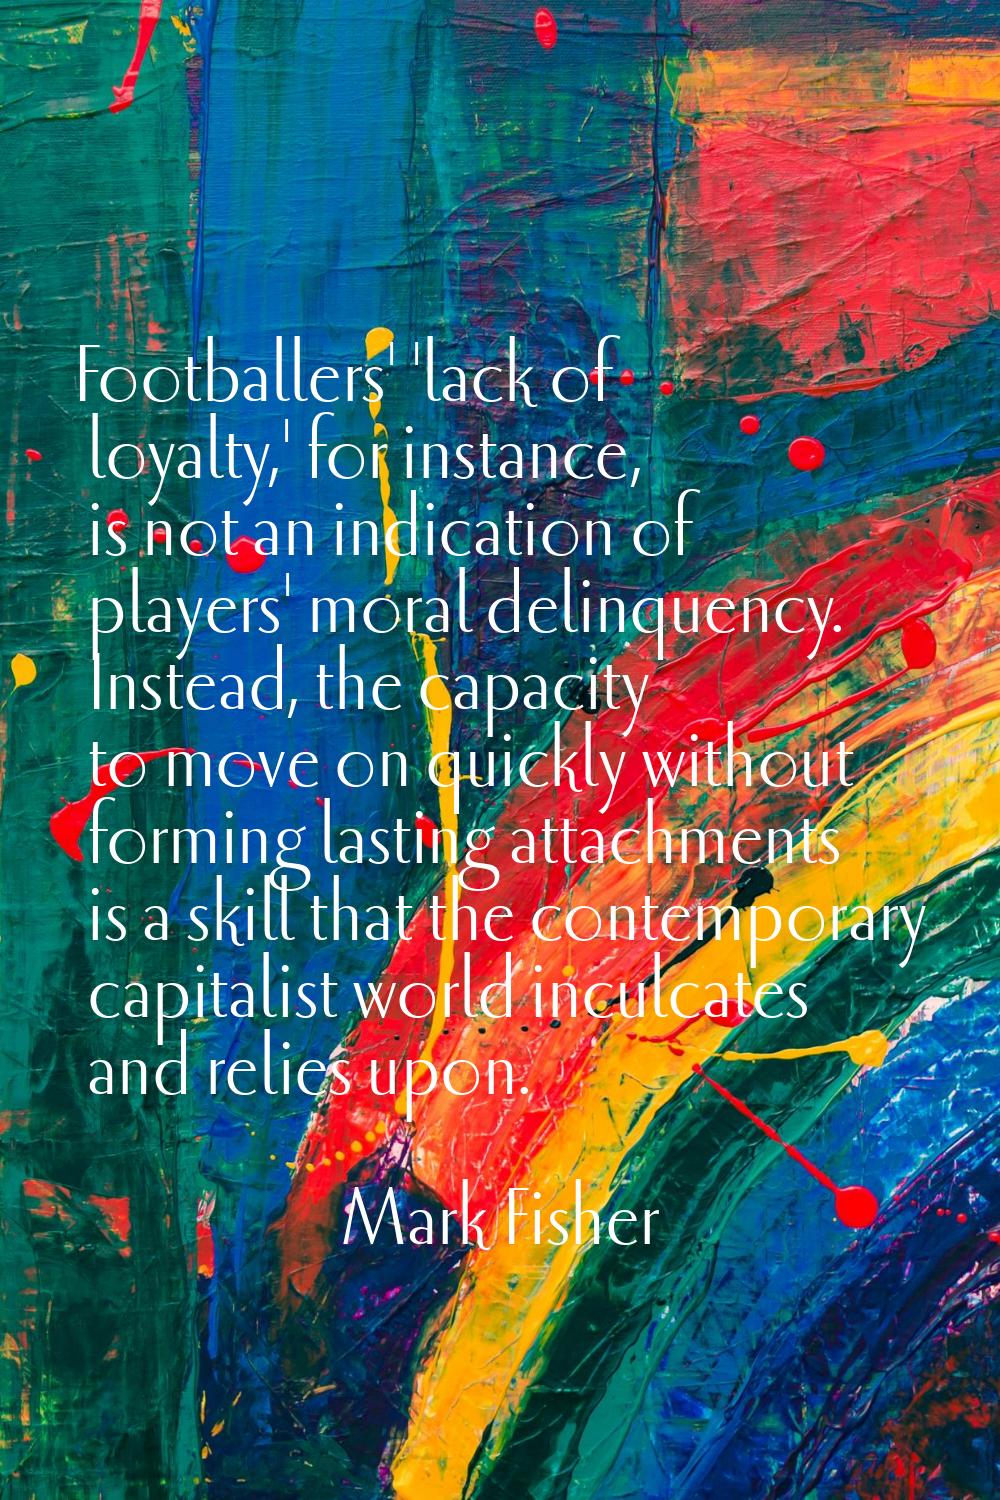 Footballers' 'lack of loyalty,' for instance, is not an indication of players' moral delinquency. I